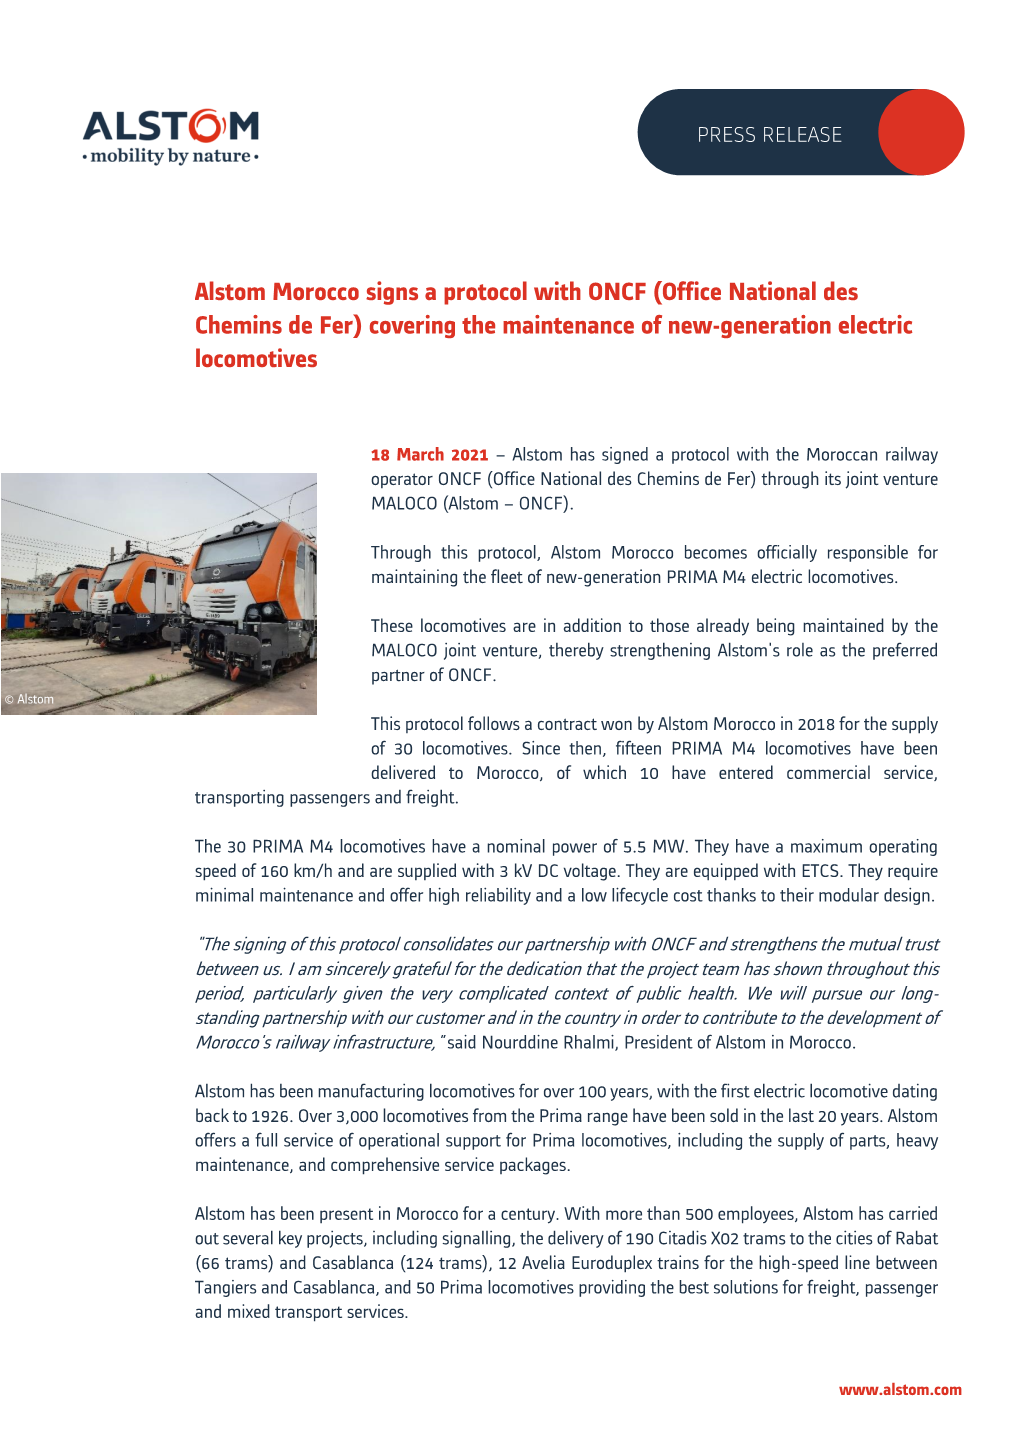 Alstom Morocco Signs a Protocol with ONCF (Office National Des Chemins De Fer) Covering the Maintenance of New-Generation Electric Locomotives